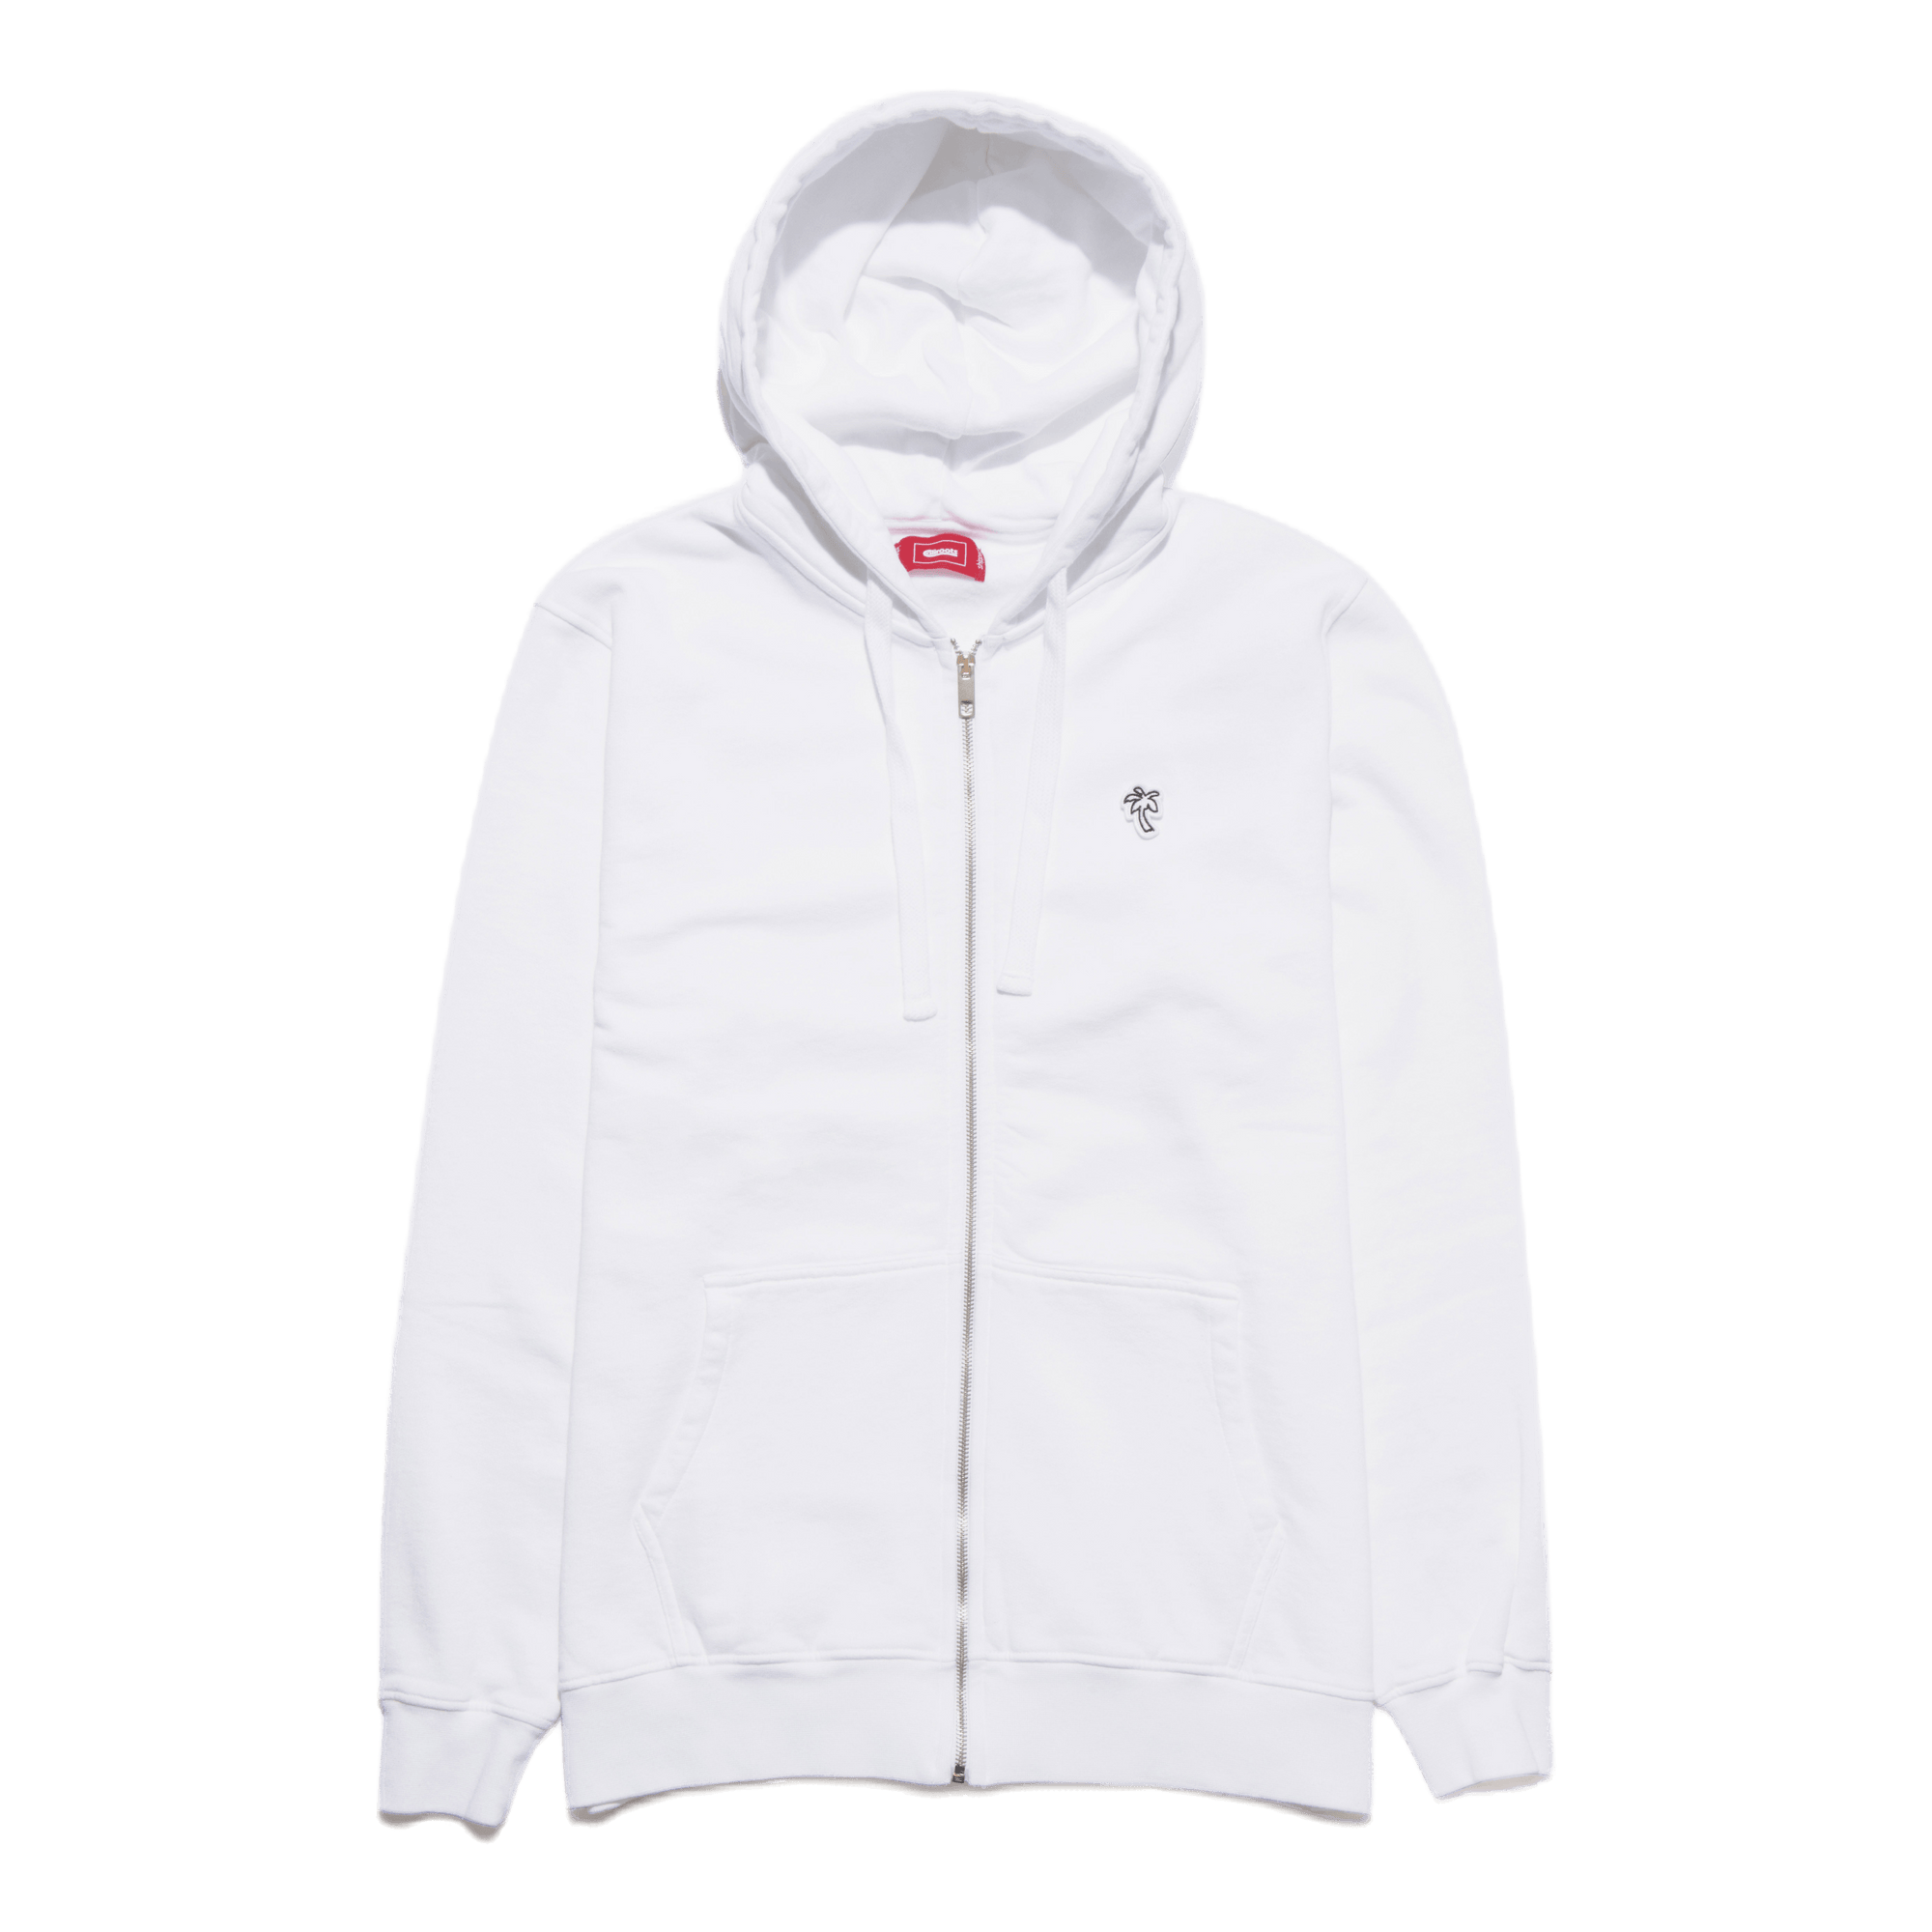 Palm Patch Zip Hoodie White